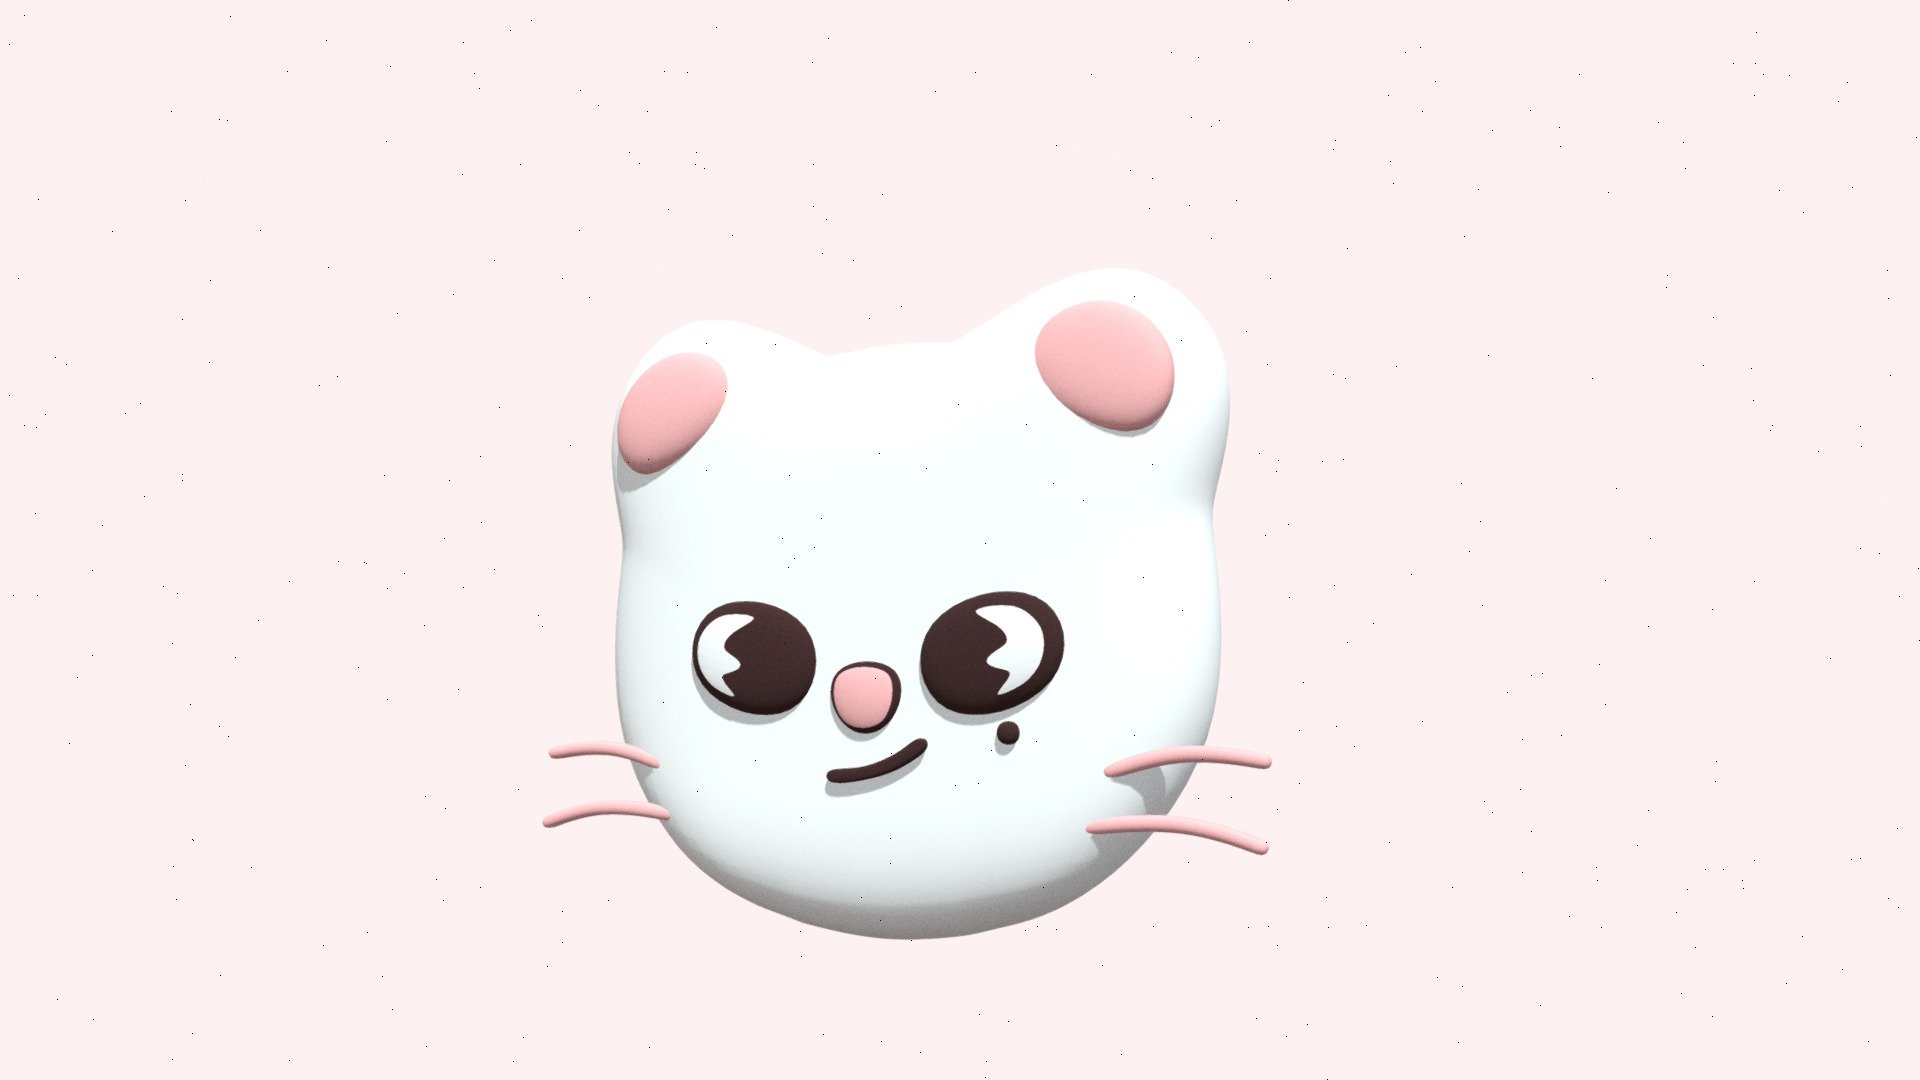 SKZOO Jiniret Cushion based of the representative character for Hyunjin from the k-pop group Stray Kids. Pretty basic model that I created for a couple of personal projects 3d model